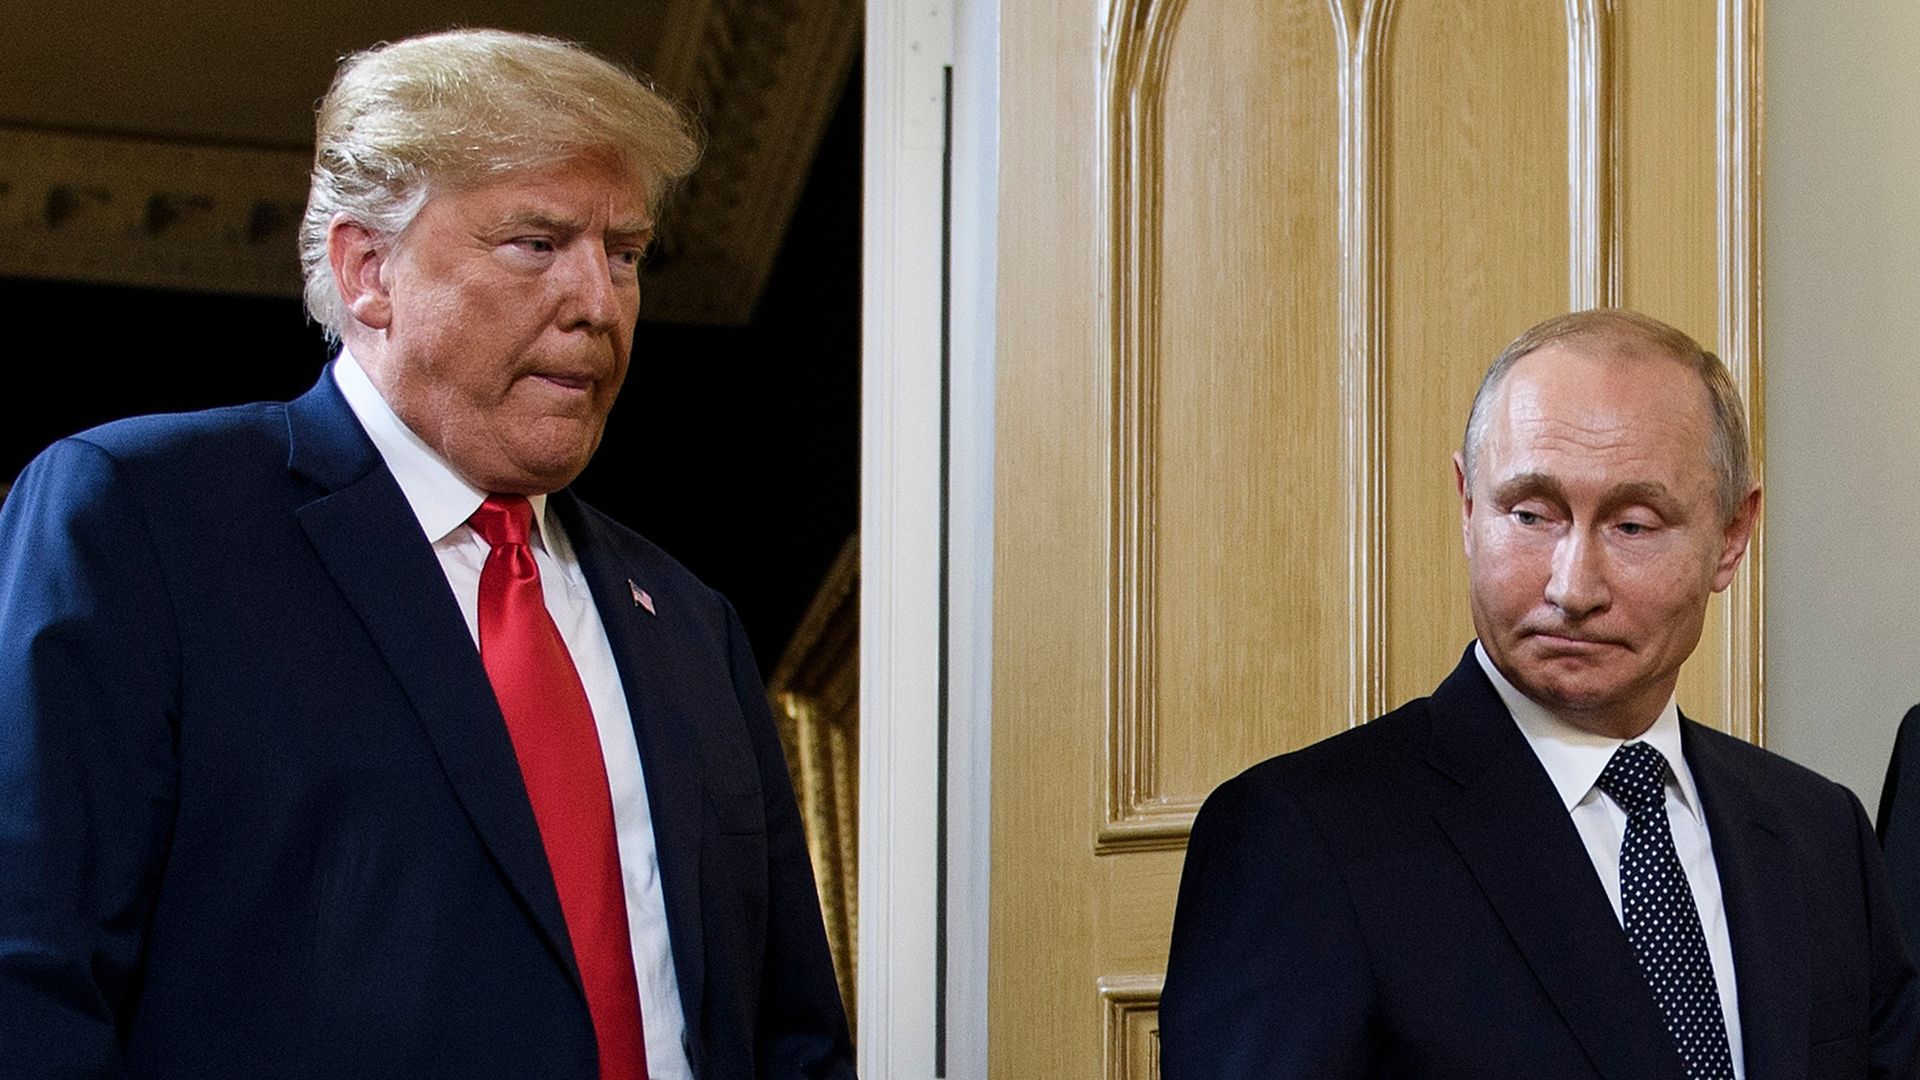 Trump and Putin standing next to each other